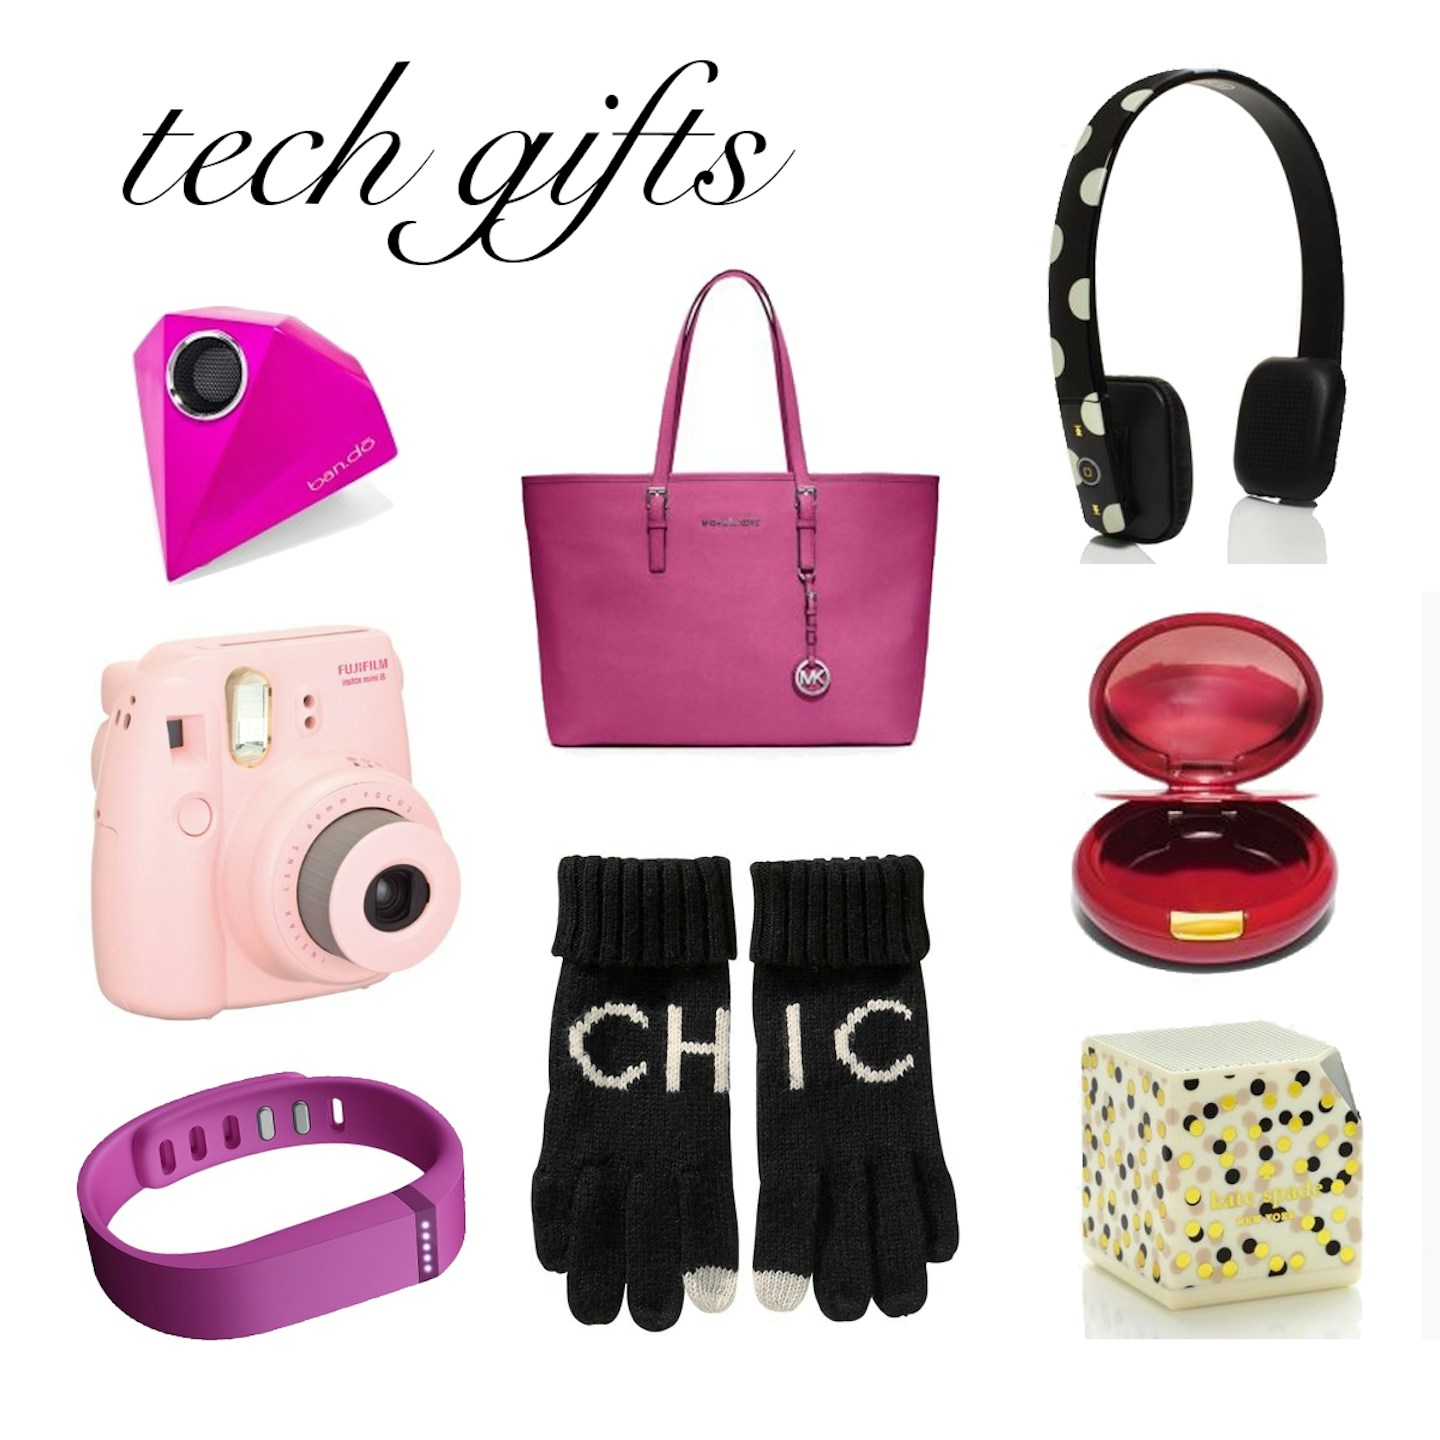 tech gift ideas for her